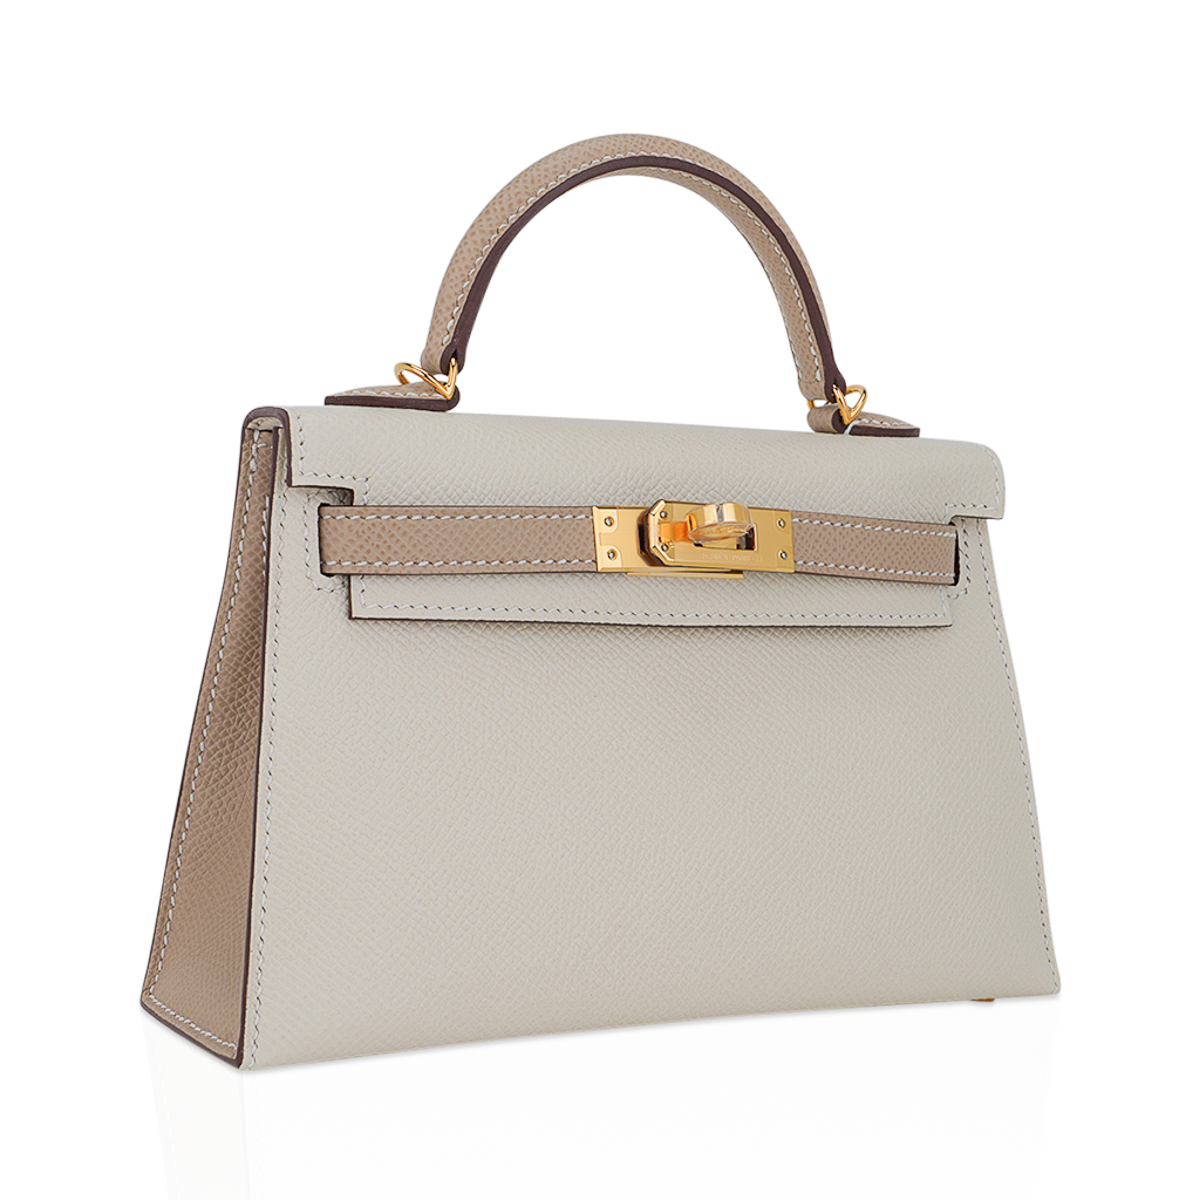 Hermes Special Order HSS Mini Kelly 20 Sellier Bag Craie & Trench Epsom Leather with Gold Hardware